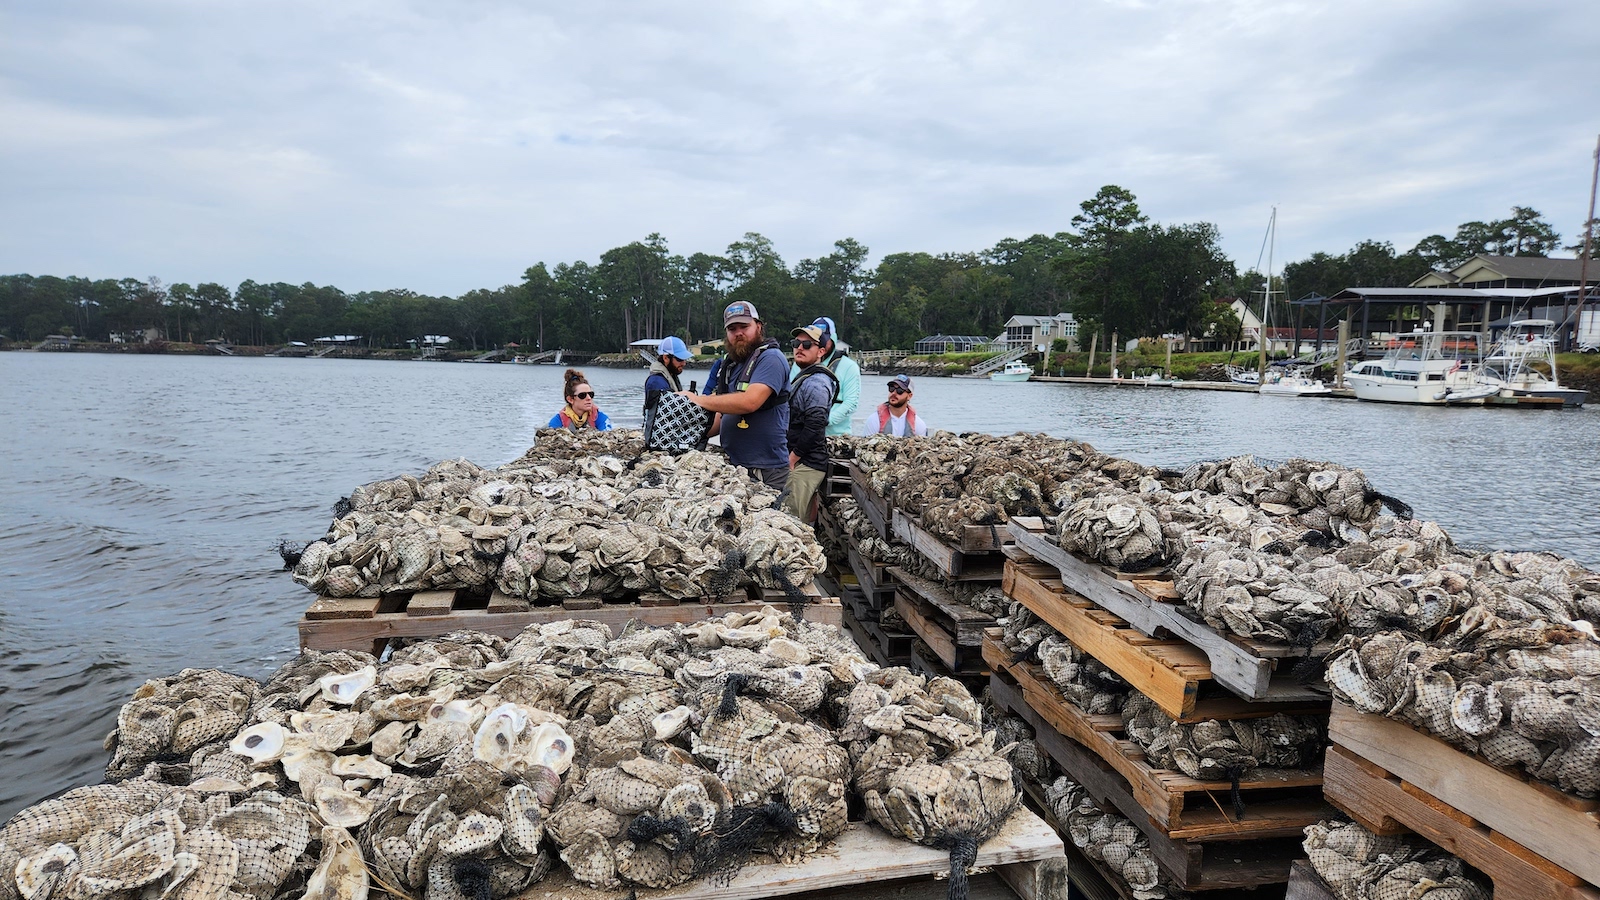 People on a raft with pallets of oyster shells.